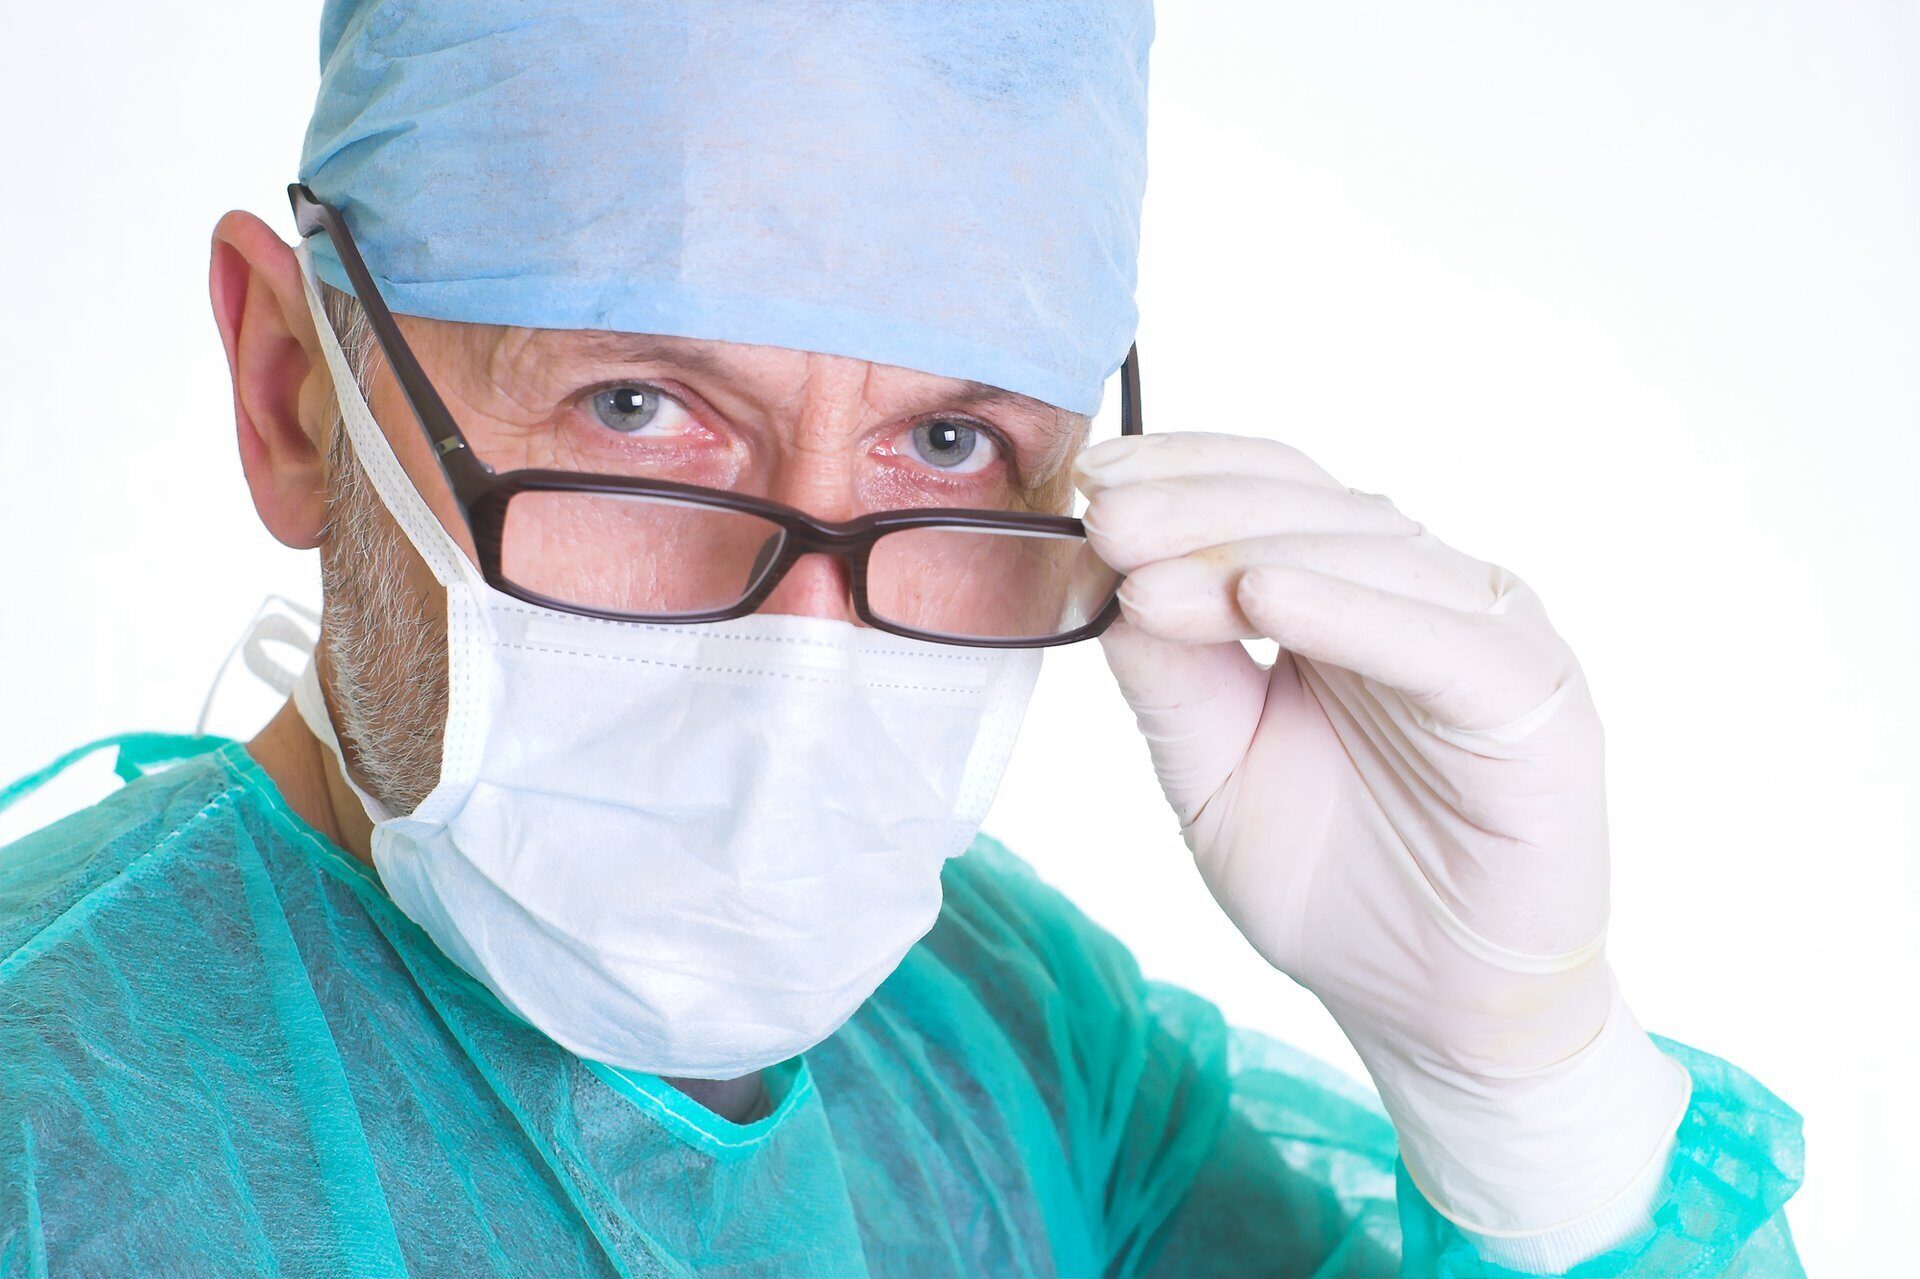 Glance of a surgeon after surgical operation